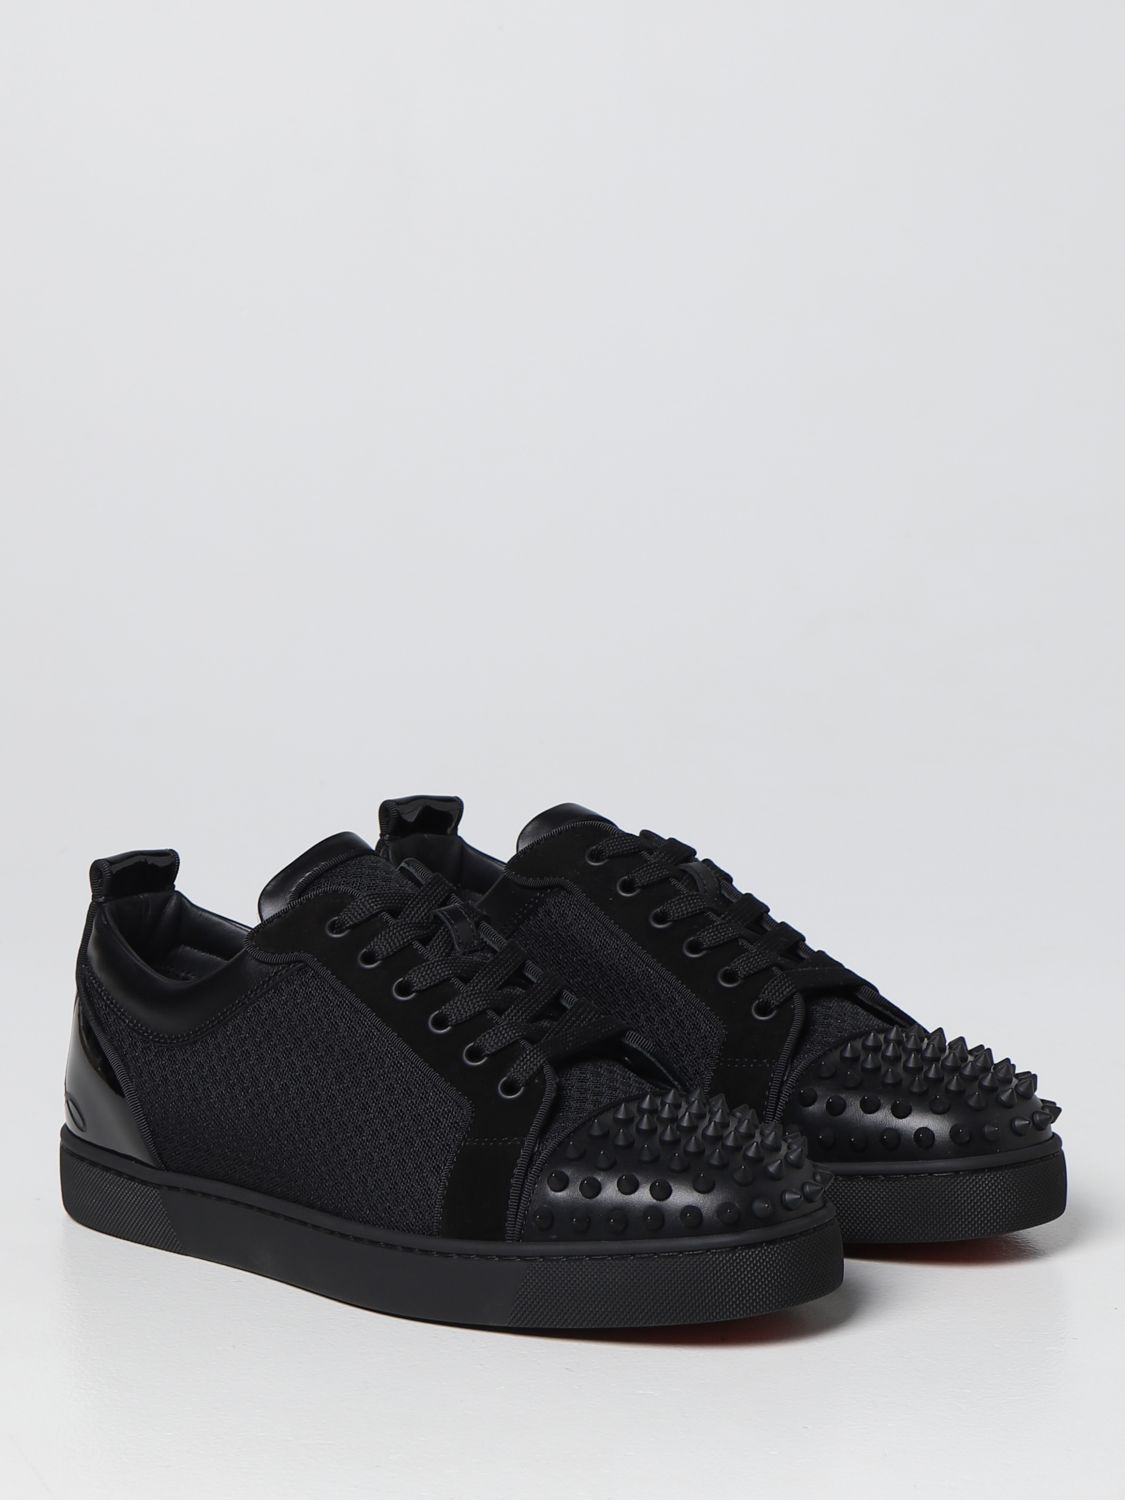 Chaussures derby Christian Louboutin: Chaussures derby Christian Louboutin homme noir 2